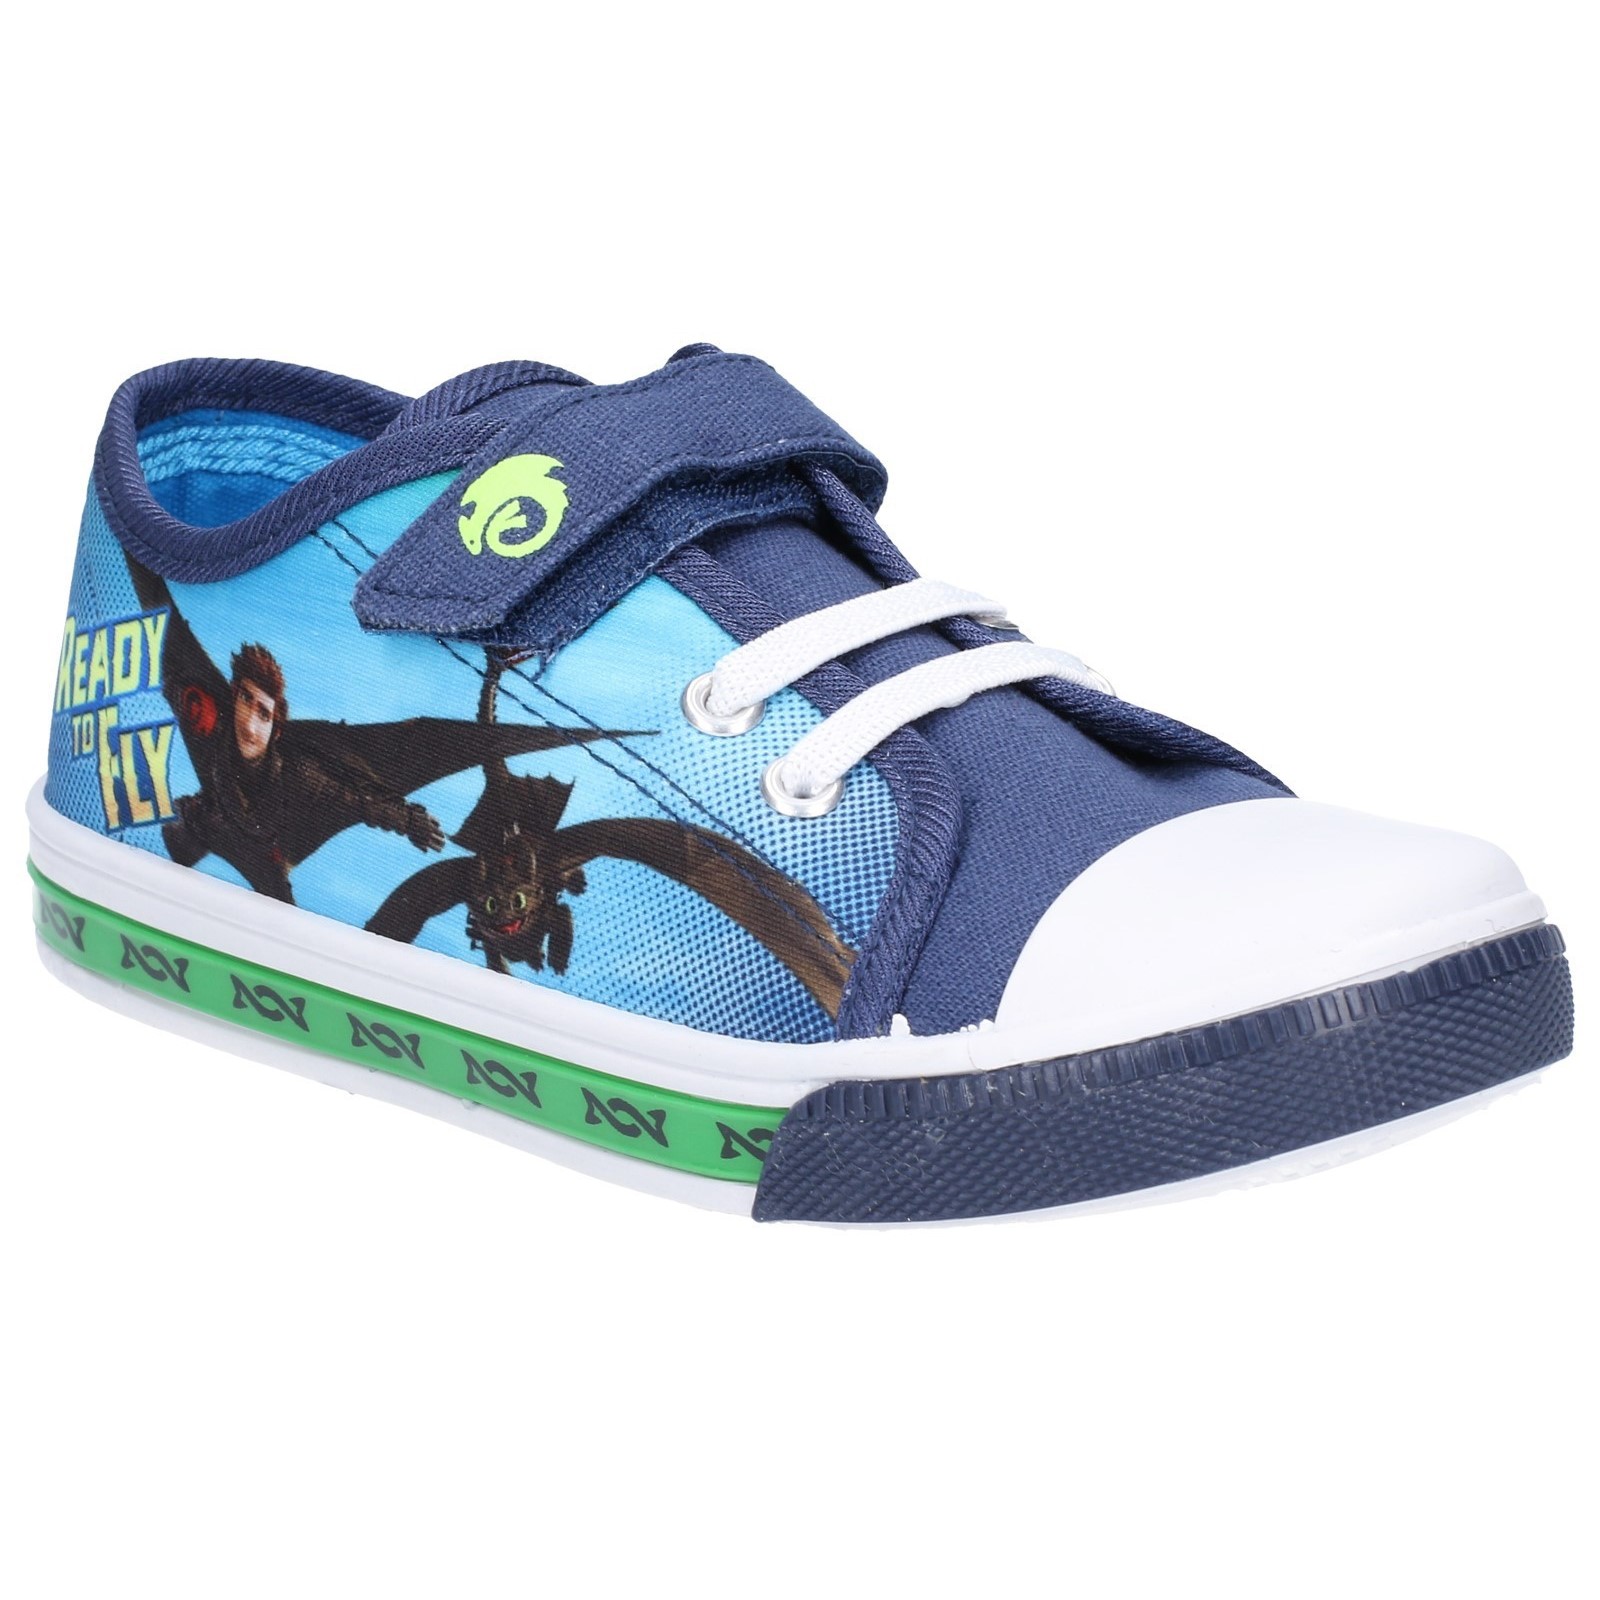 How to train your dragon Low Sneakers touch fastening shoe